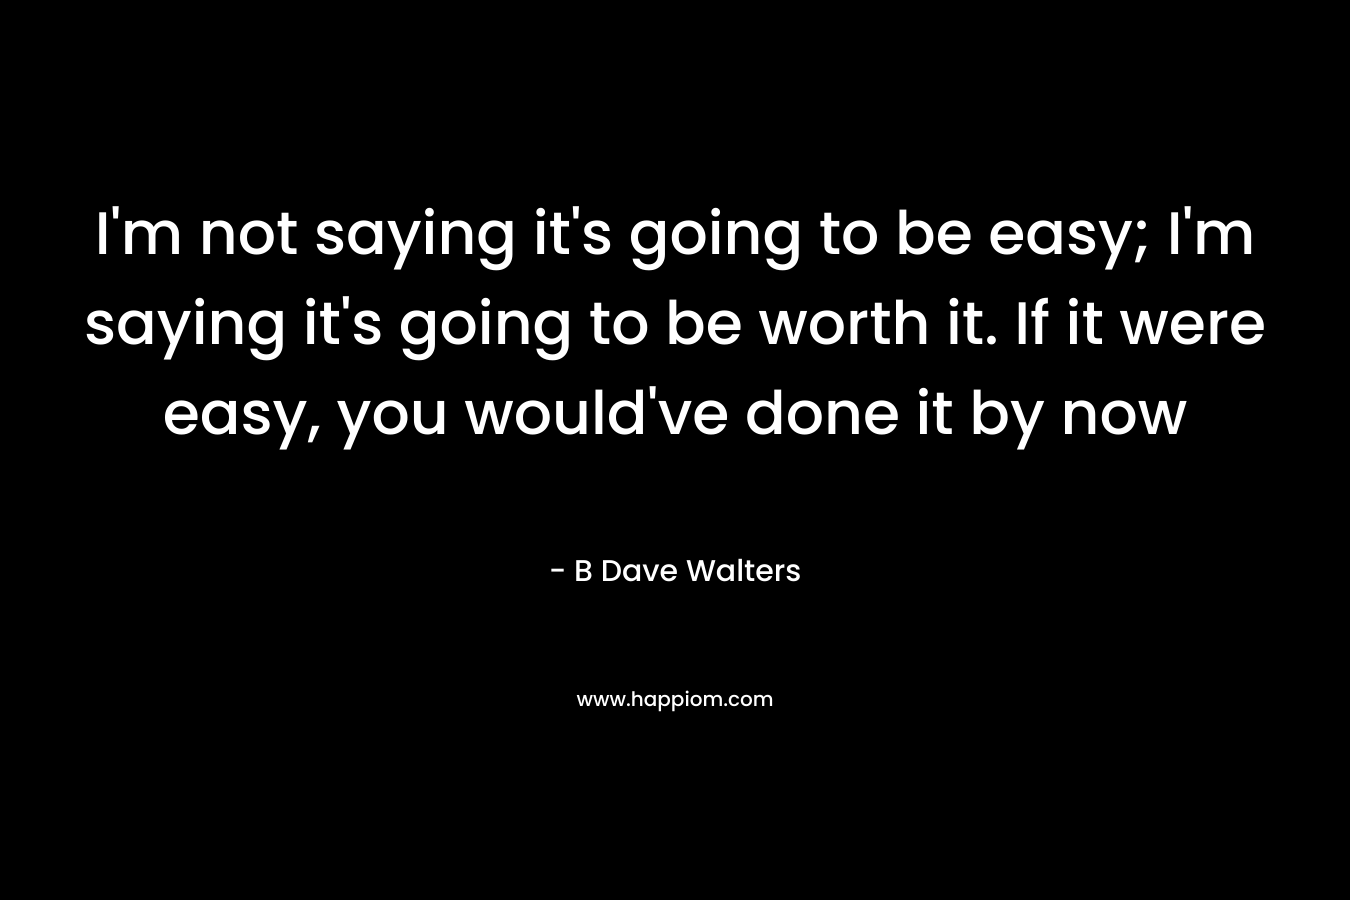 I'm not saying it's going to be easy; I'm saying it's going to be worth it. If it were easy, you would've done it by now